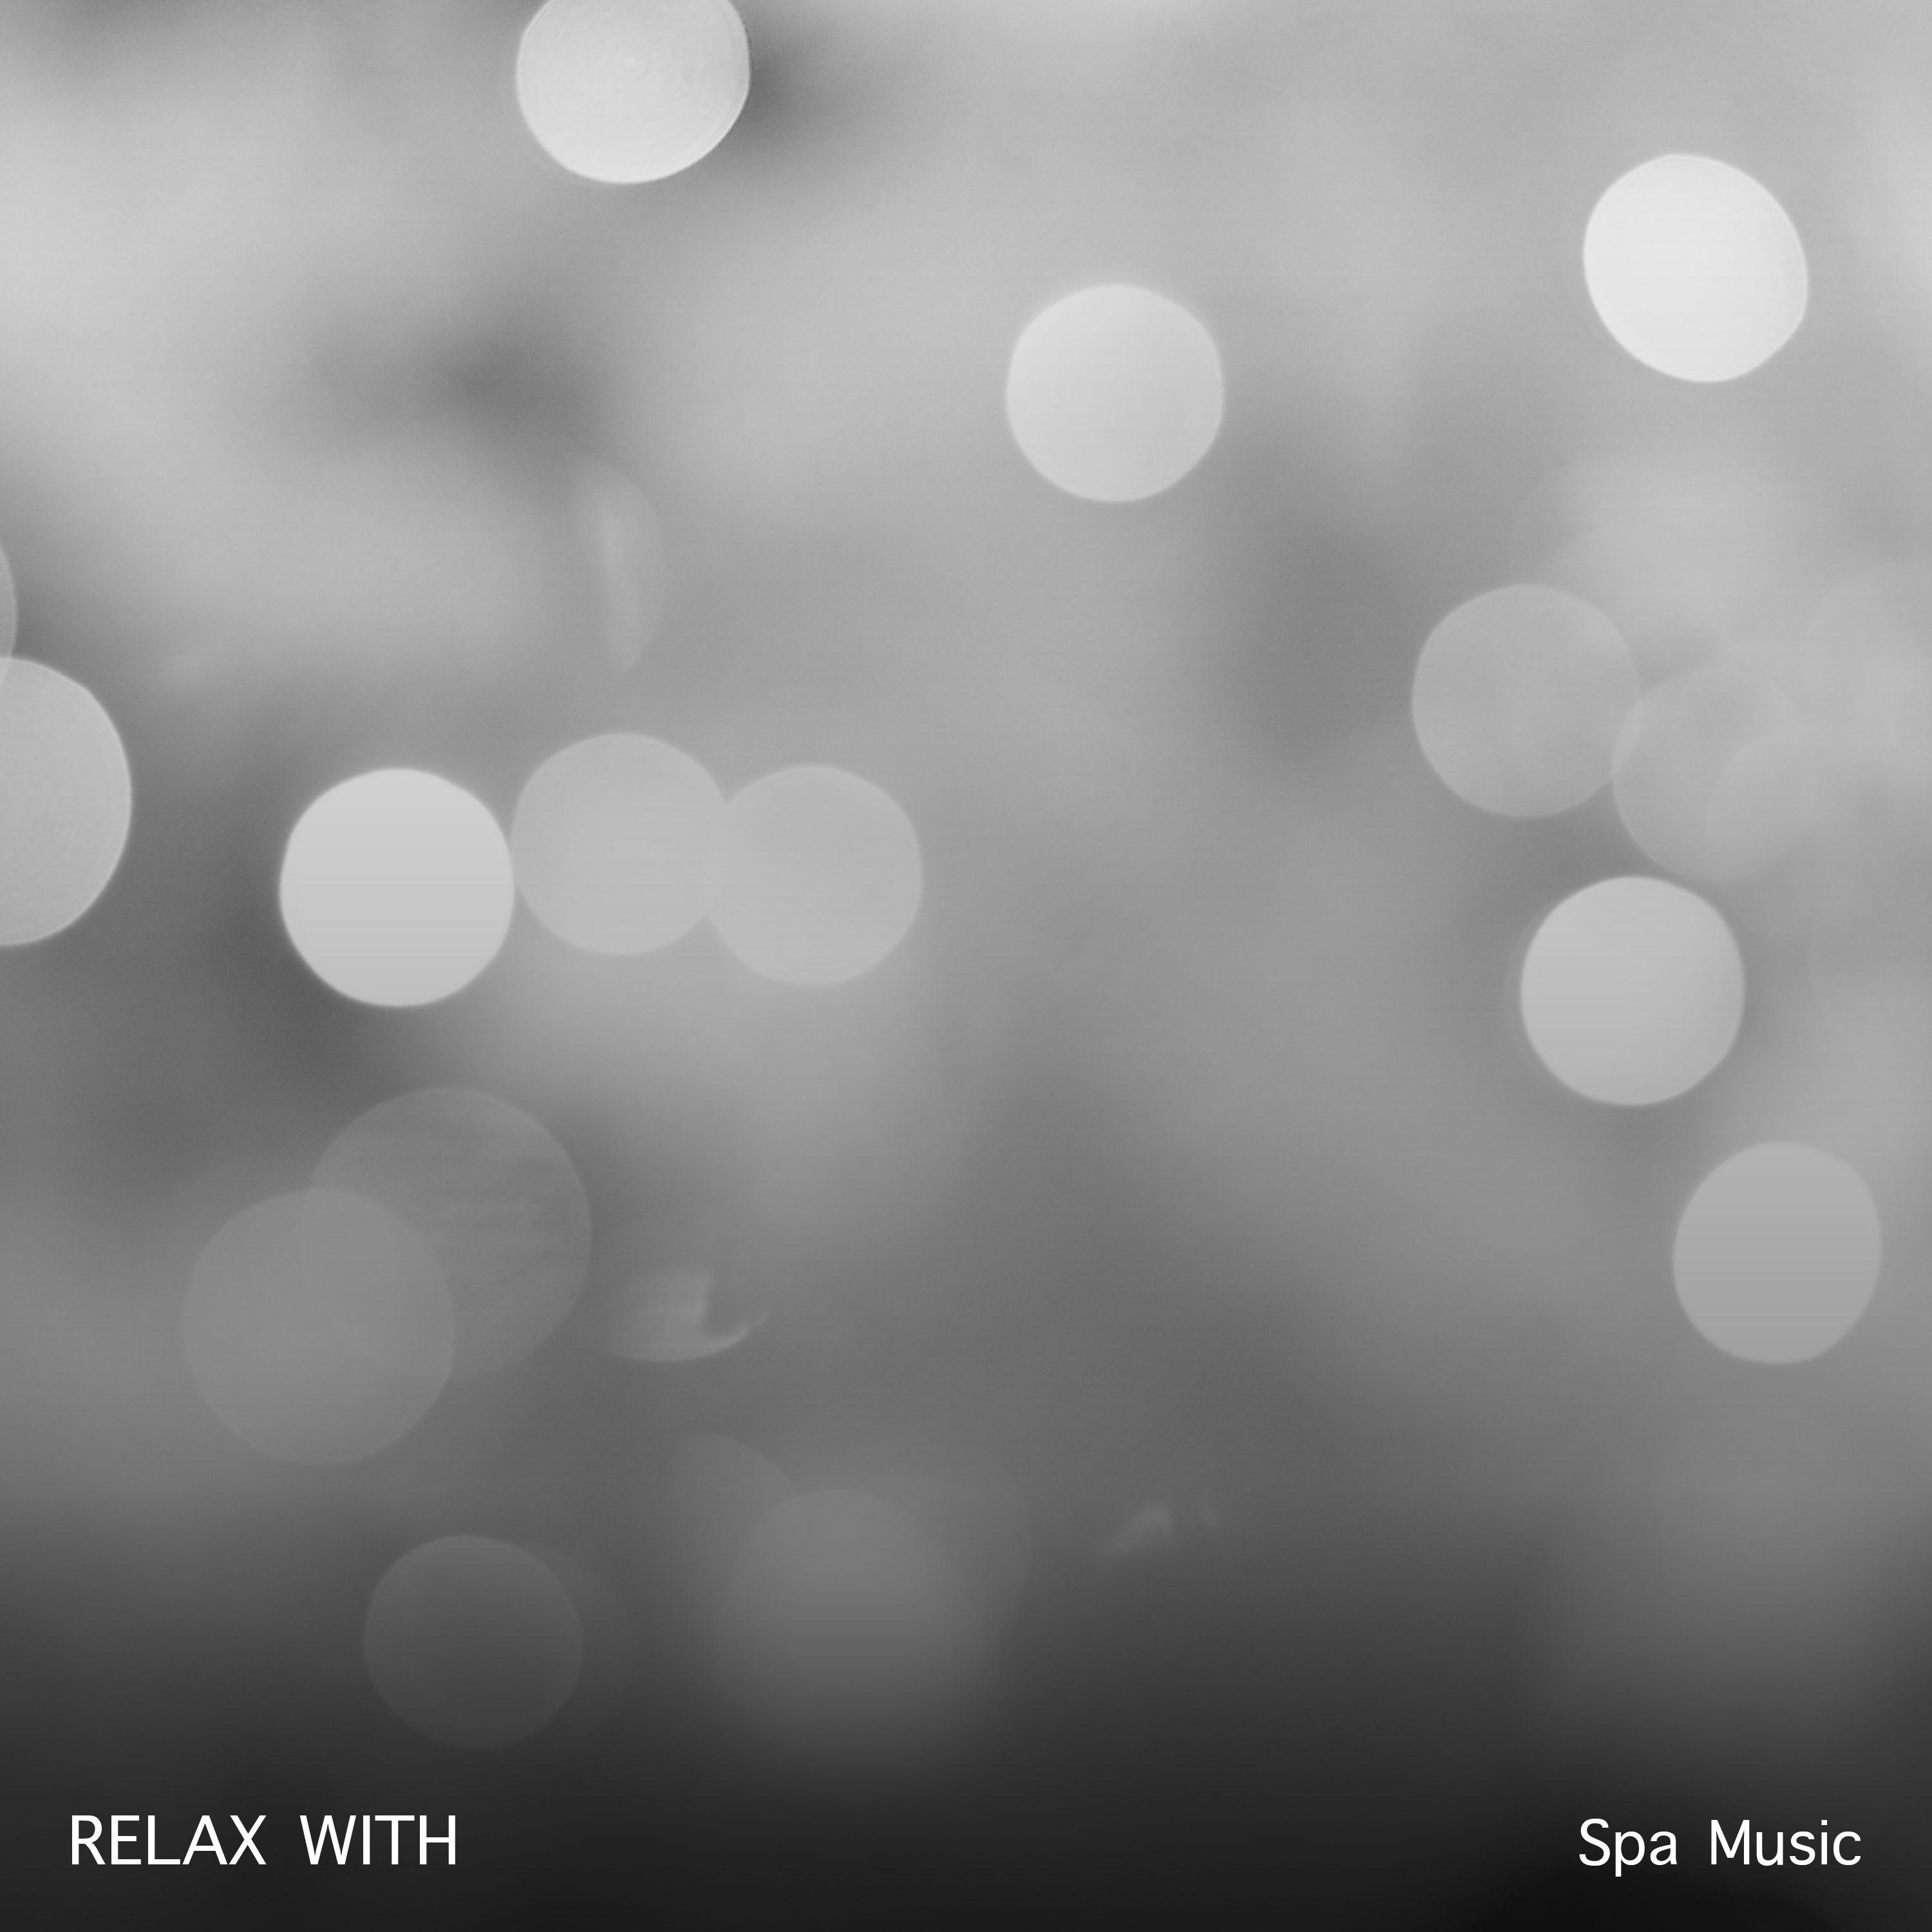 18 Relax with Spa Music Tracks